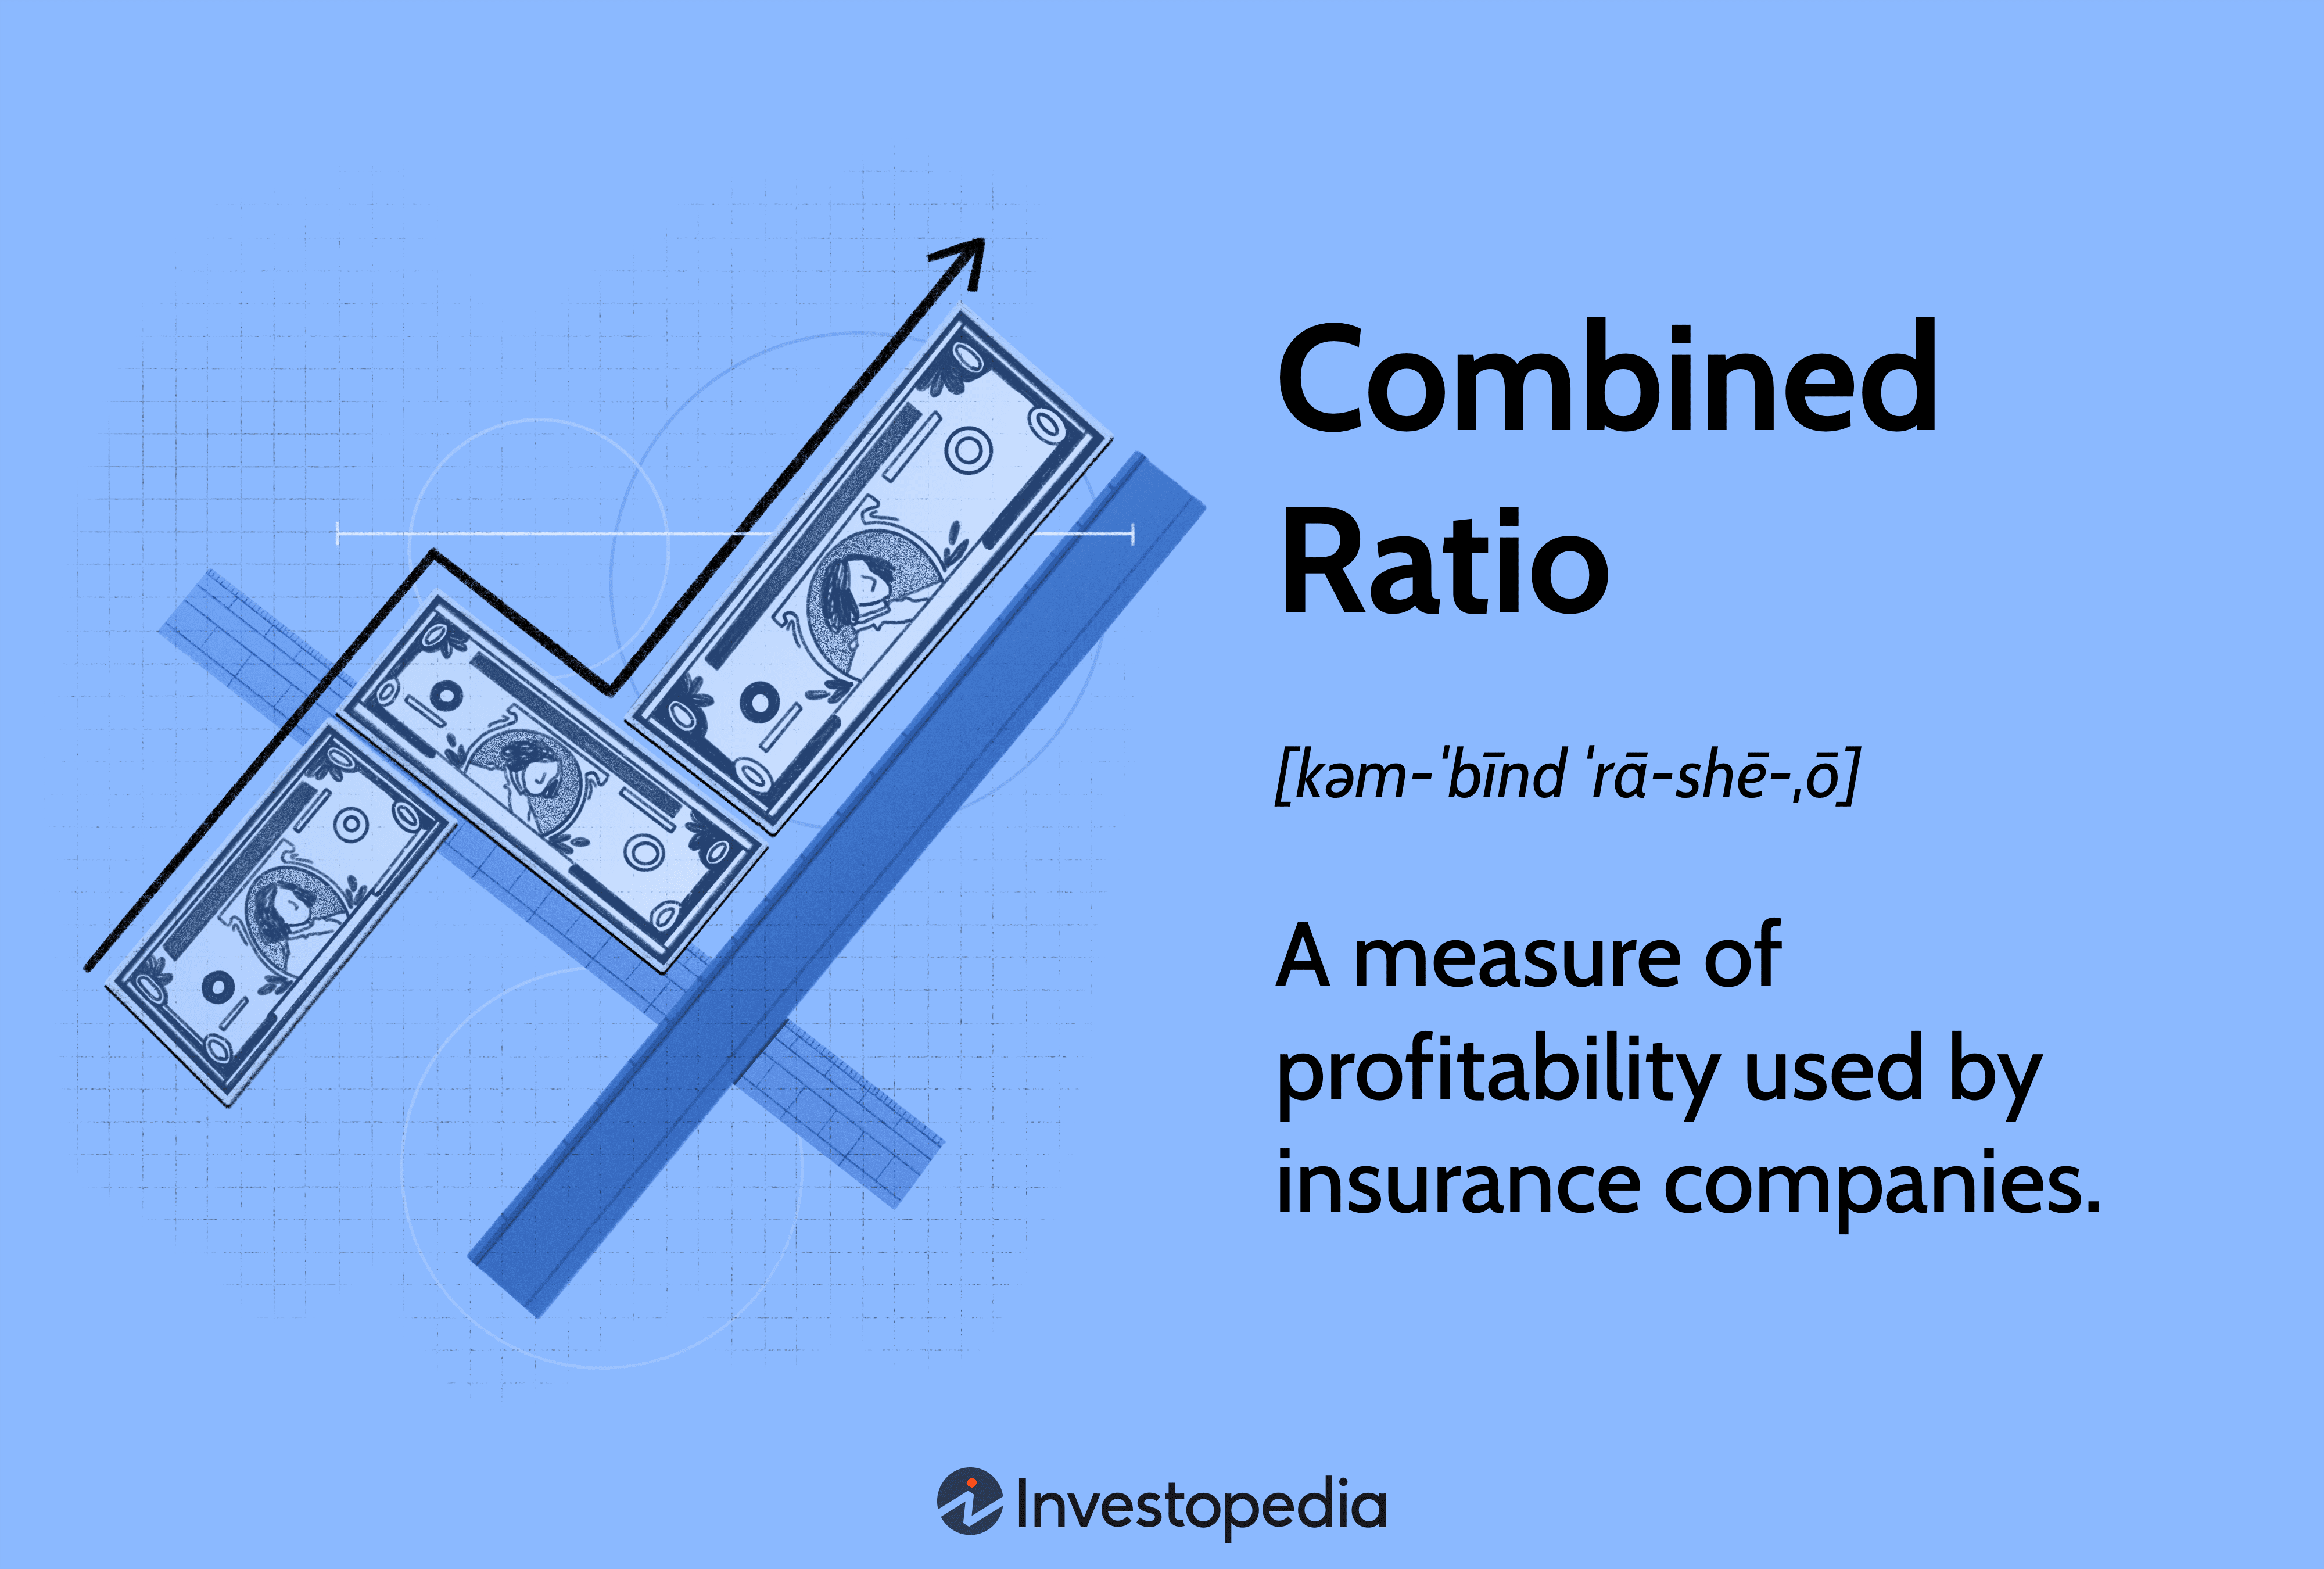 Combined Ratio: A measure of profitability used by insurance companies.